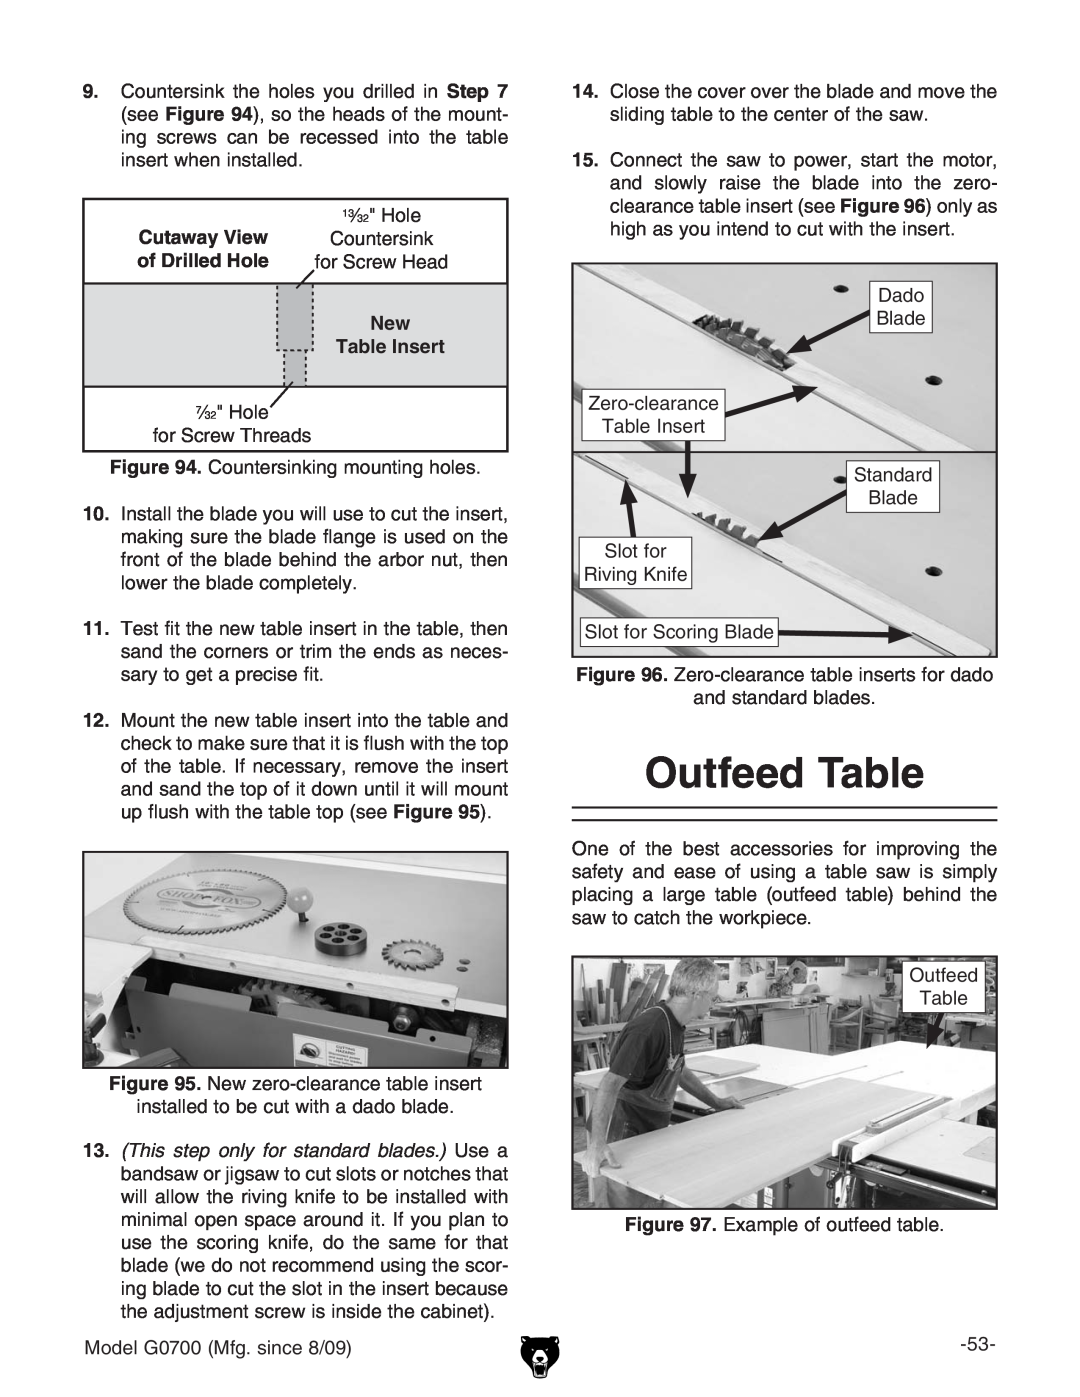 Grizzly G0700 owner manual Outfeed Table, Cutaway View, of Drilled Hole 